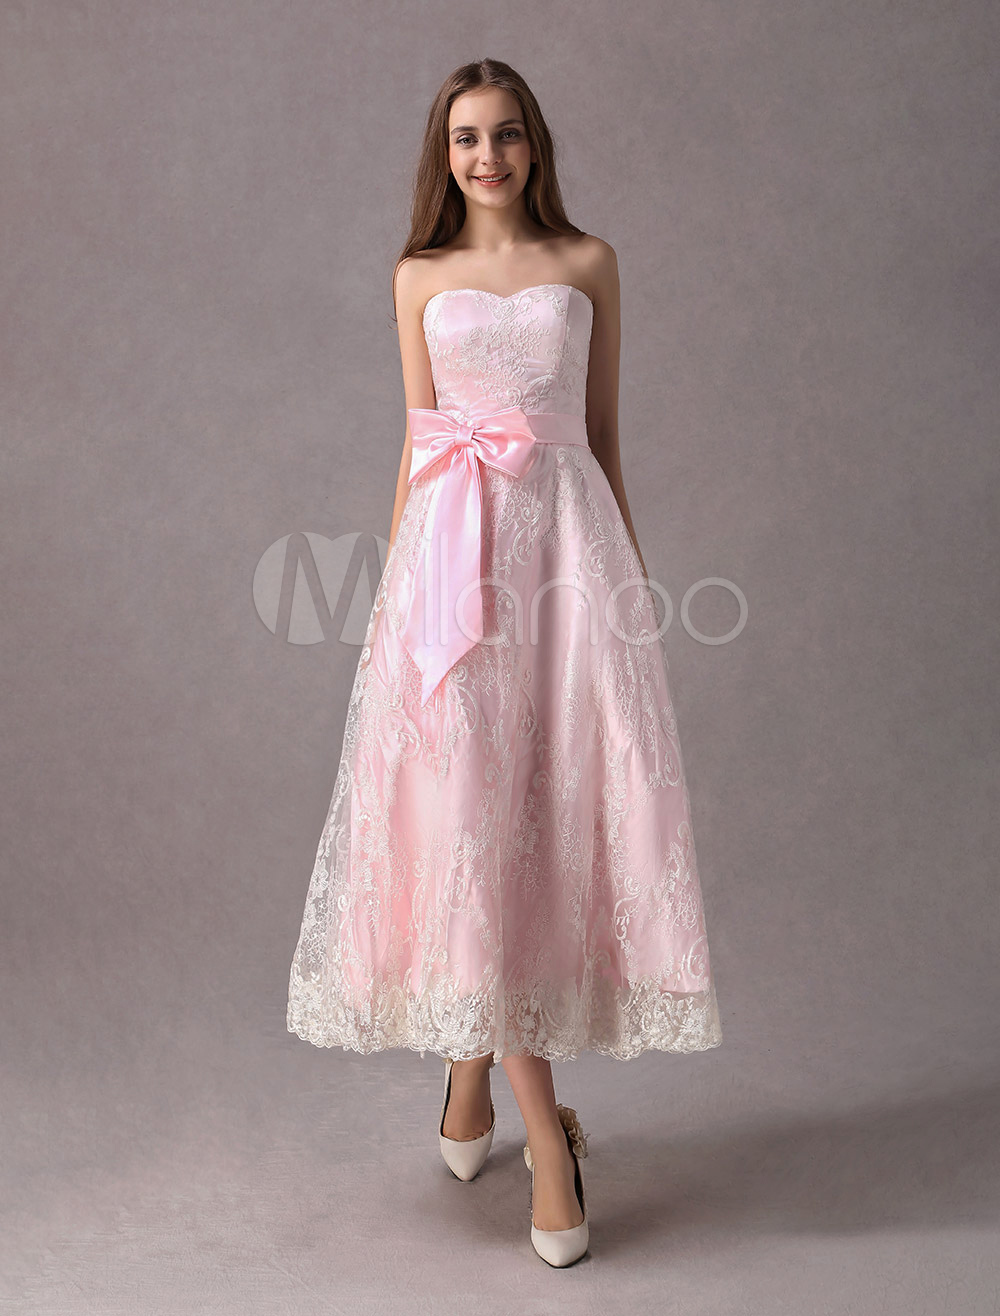 Lace Wedding Dresses Short Soft Pink Strapless Sweetheart Neckline Bow ...